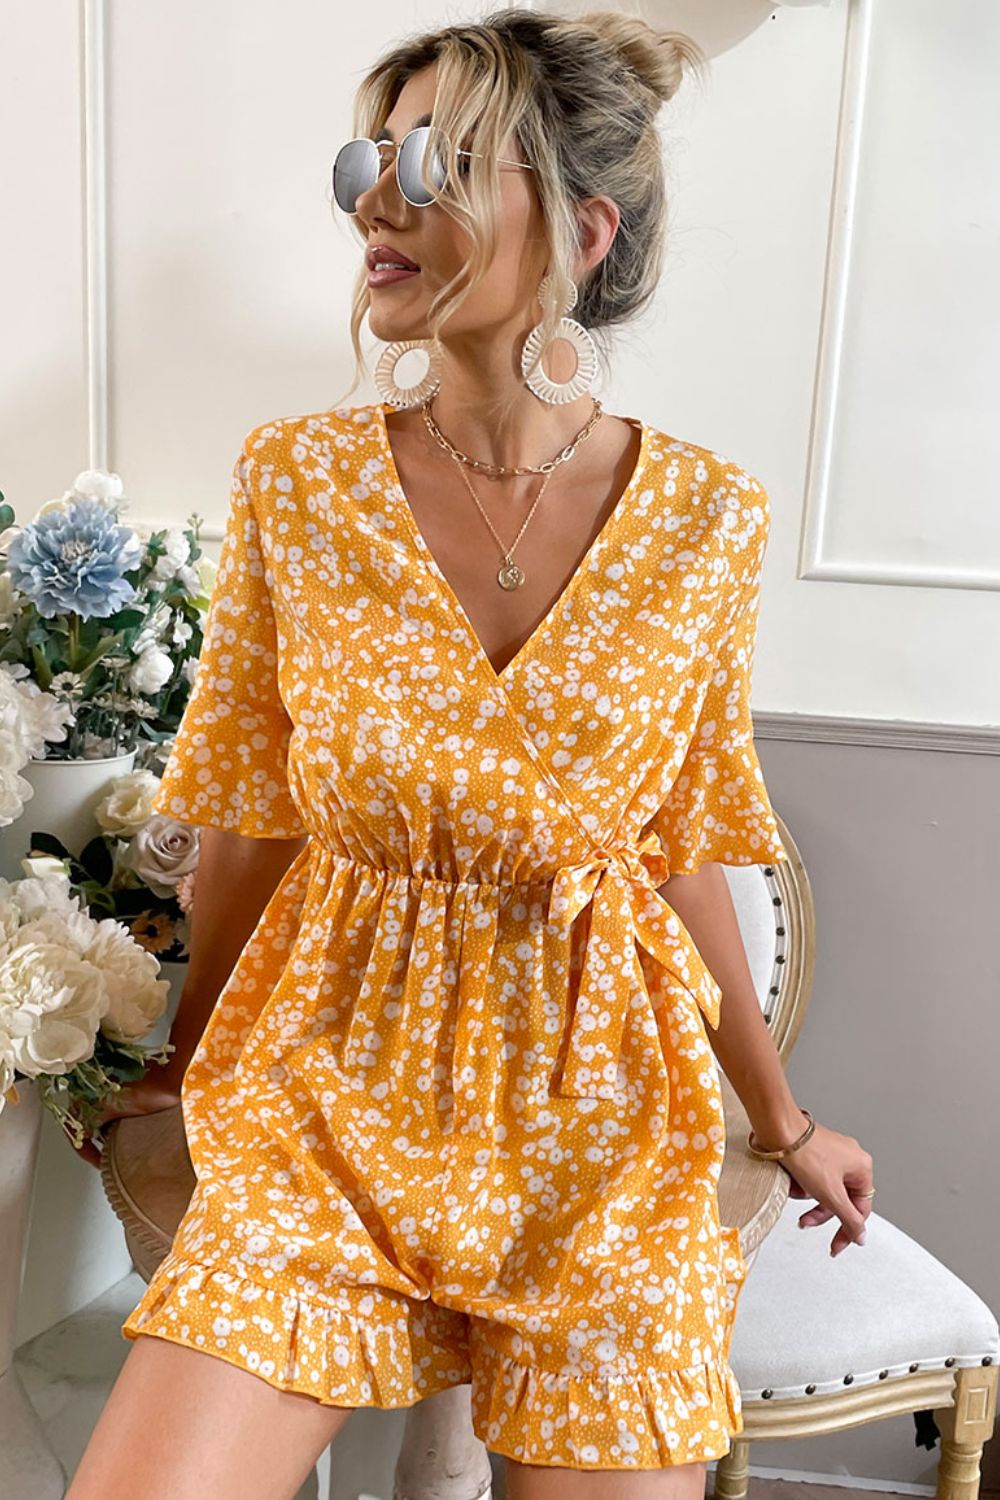 Embrace summer vibes with this chic marigold romper featuring a surplice neckline, ruffled hem, and a comfy elastic waist. Perfect for any outing